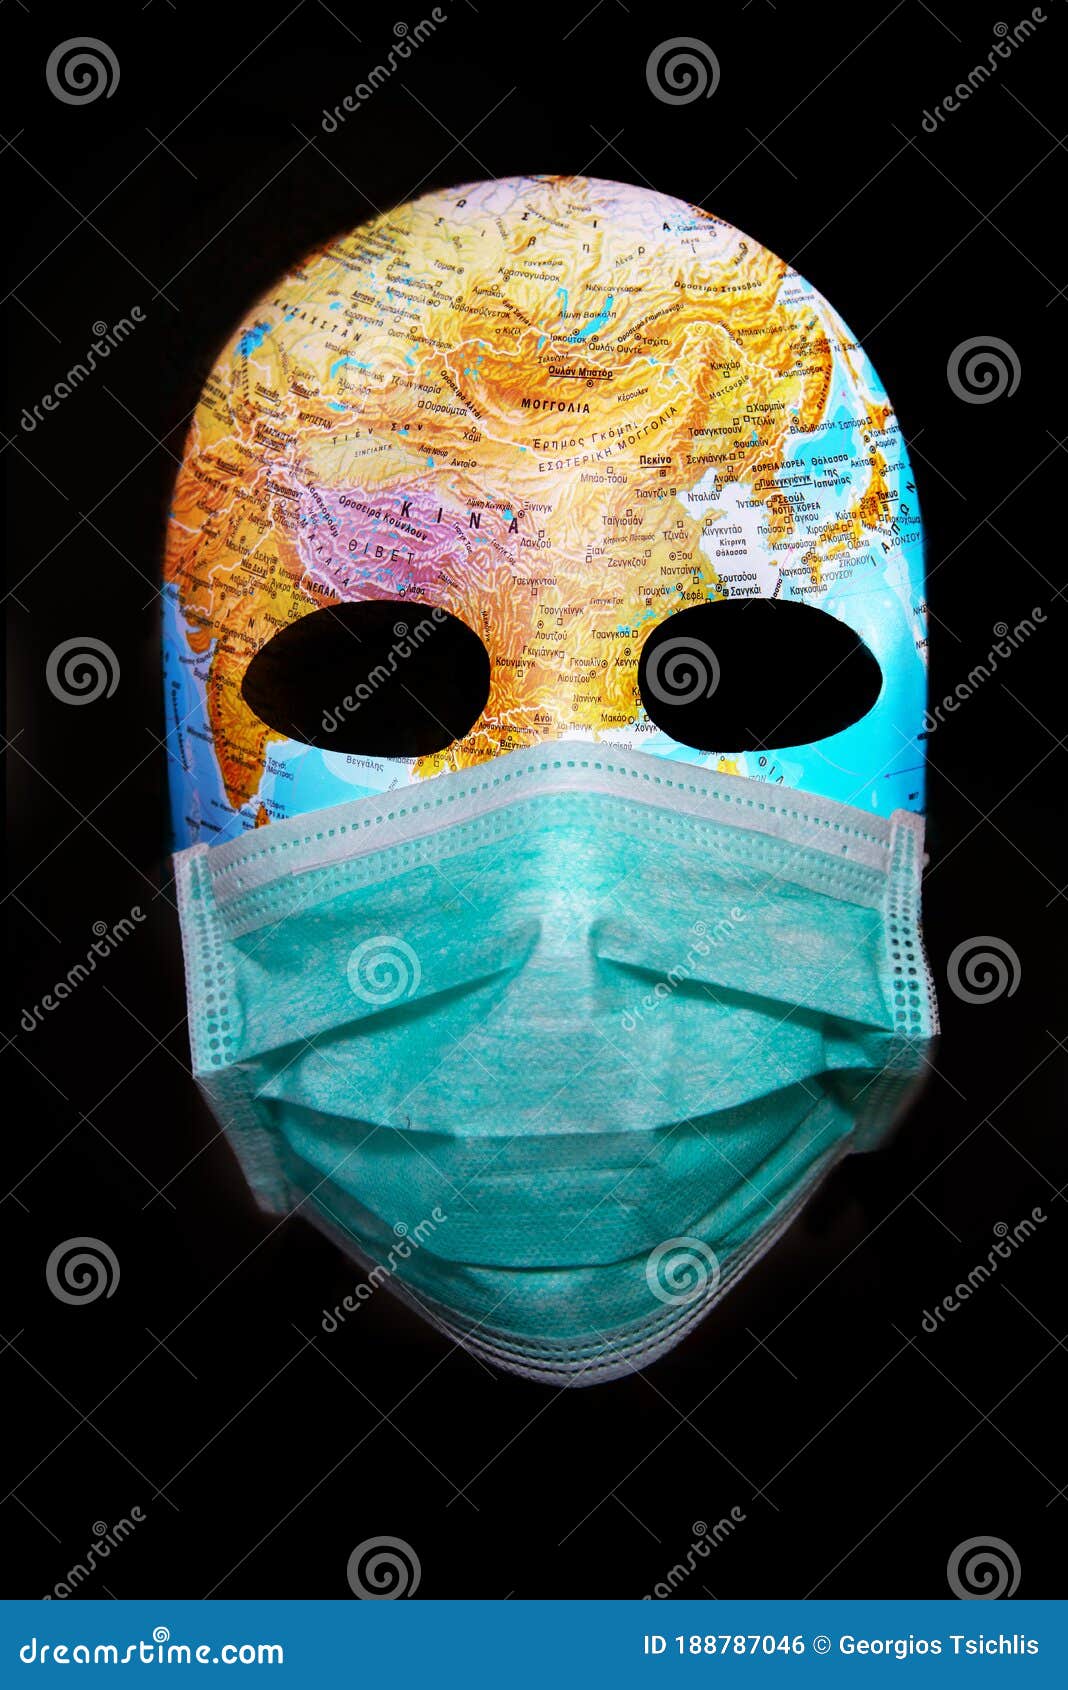 textured mask with map  wearing surgical mask. concept for corona virus pandemia